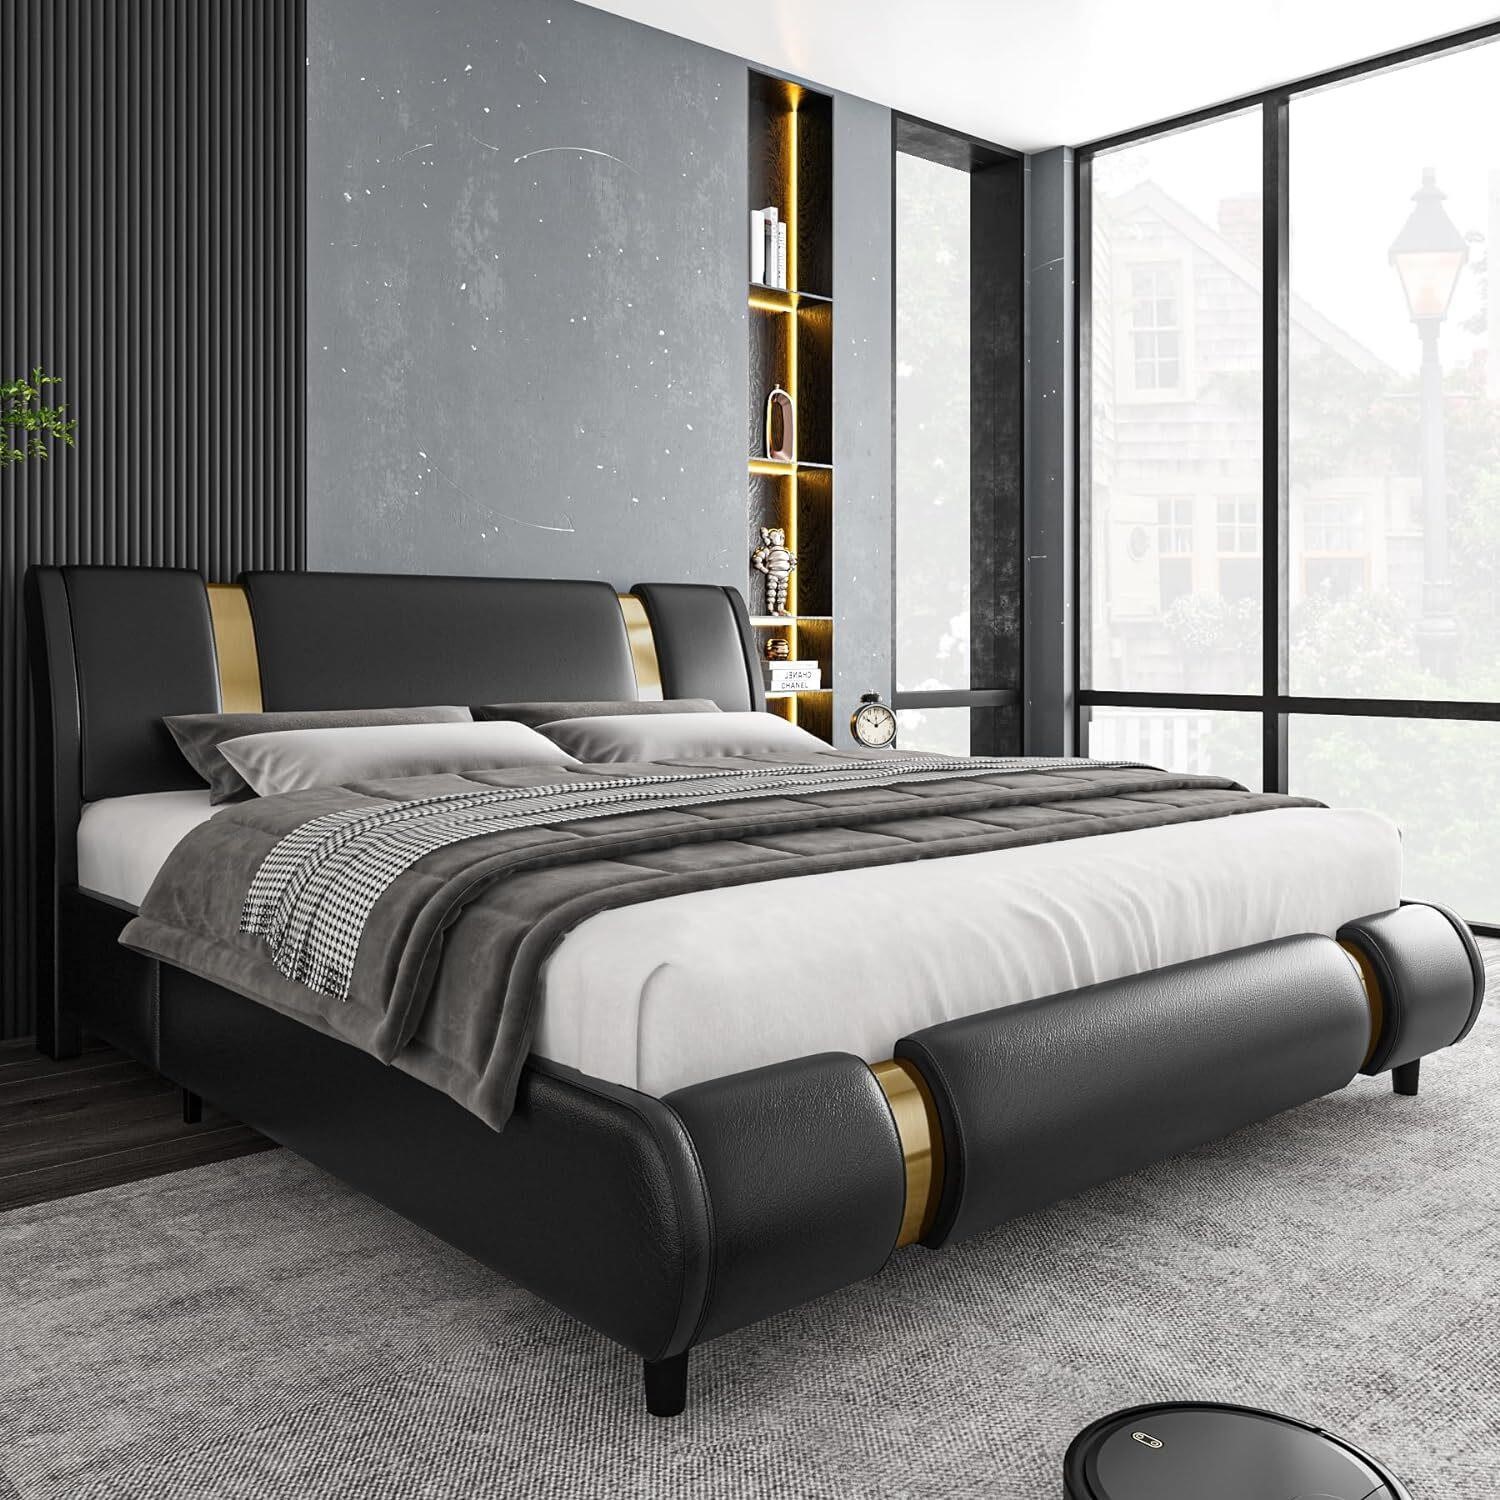 TTVIEW Faux Leather Bed  Queen  Black-Gold